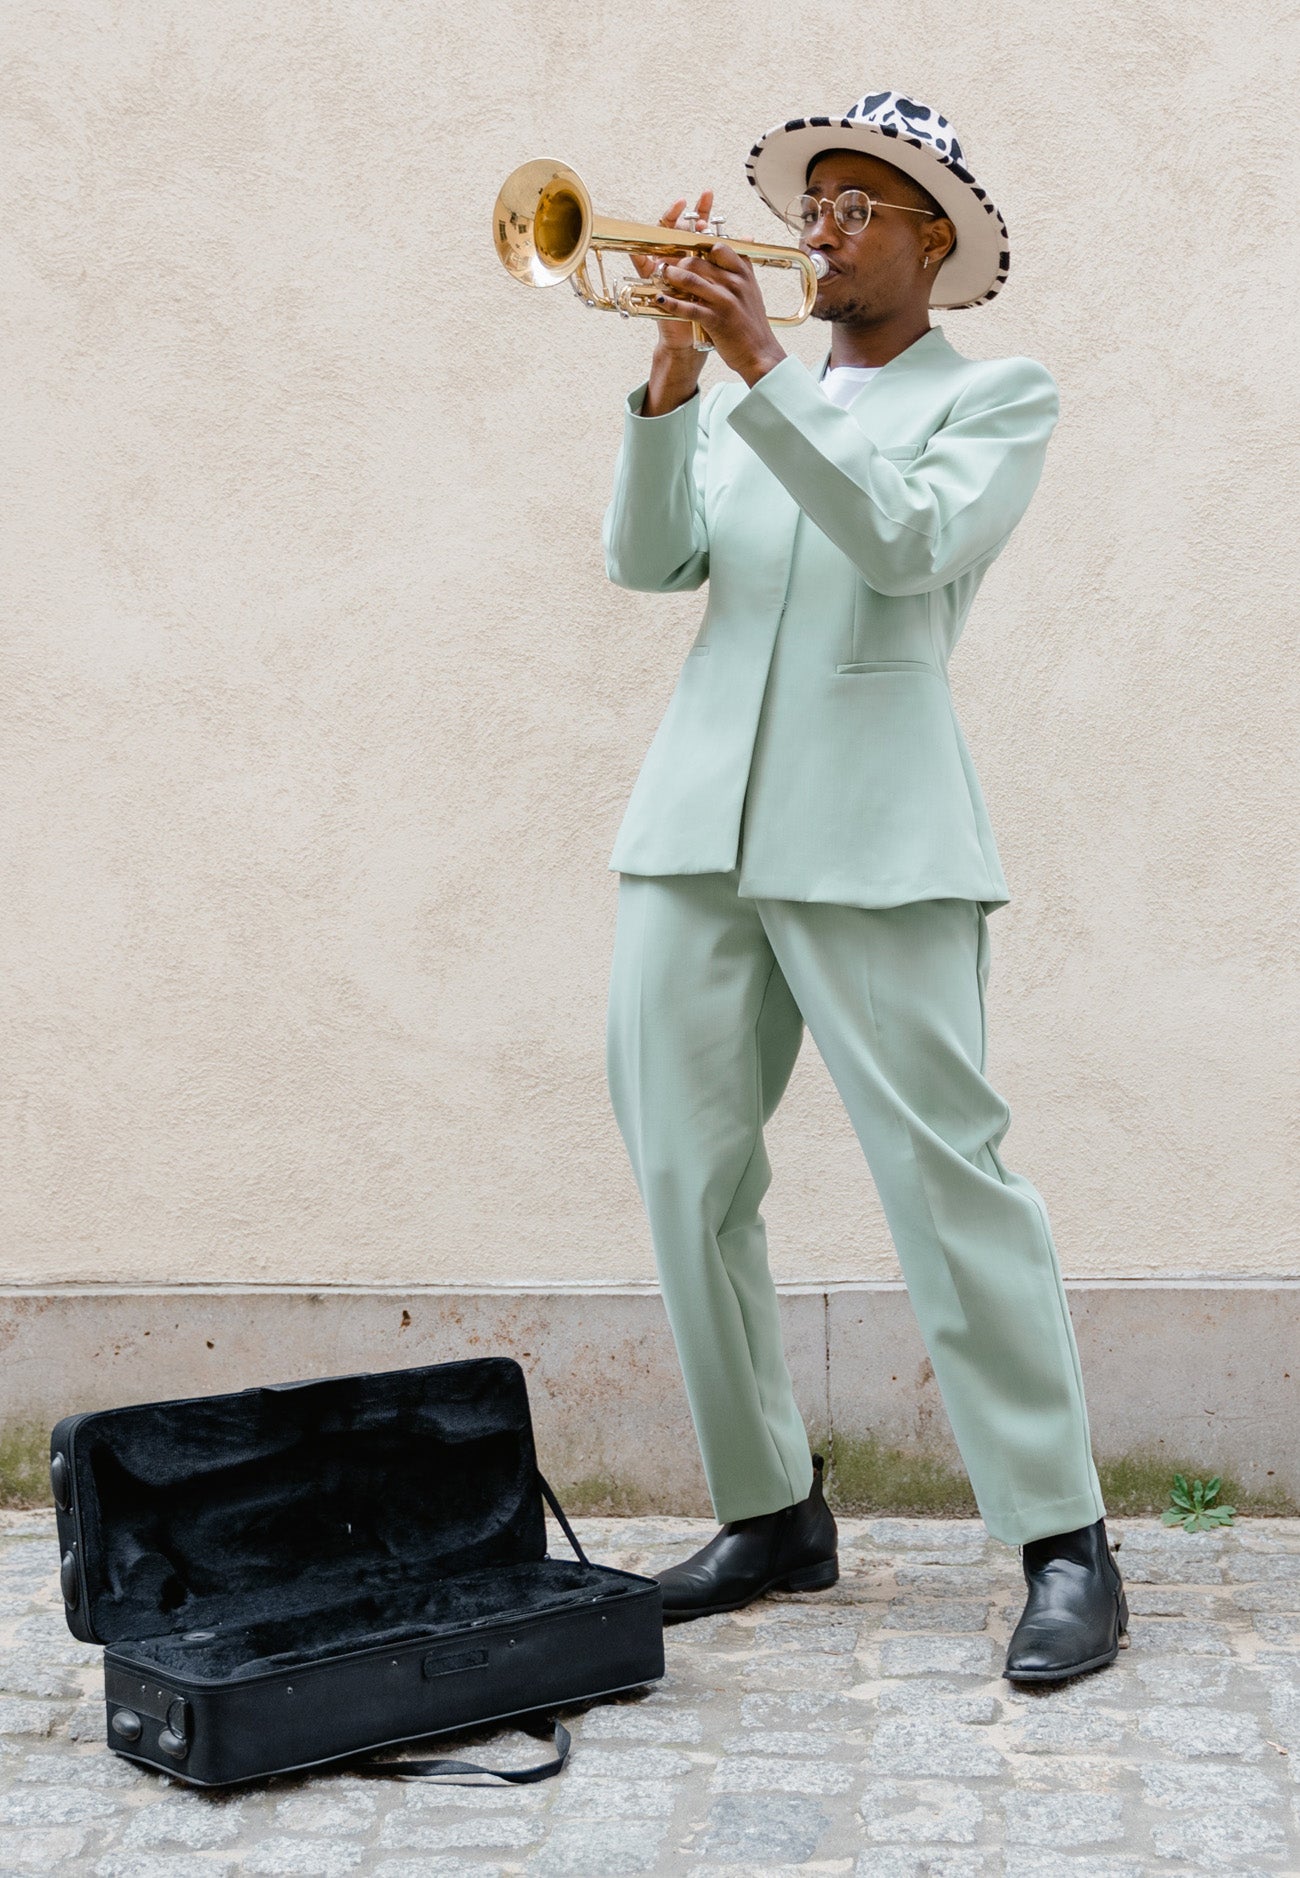 Musician wearing light green suit with black shoes